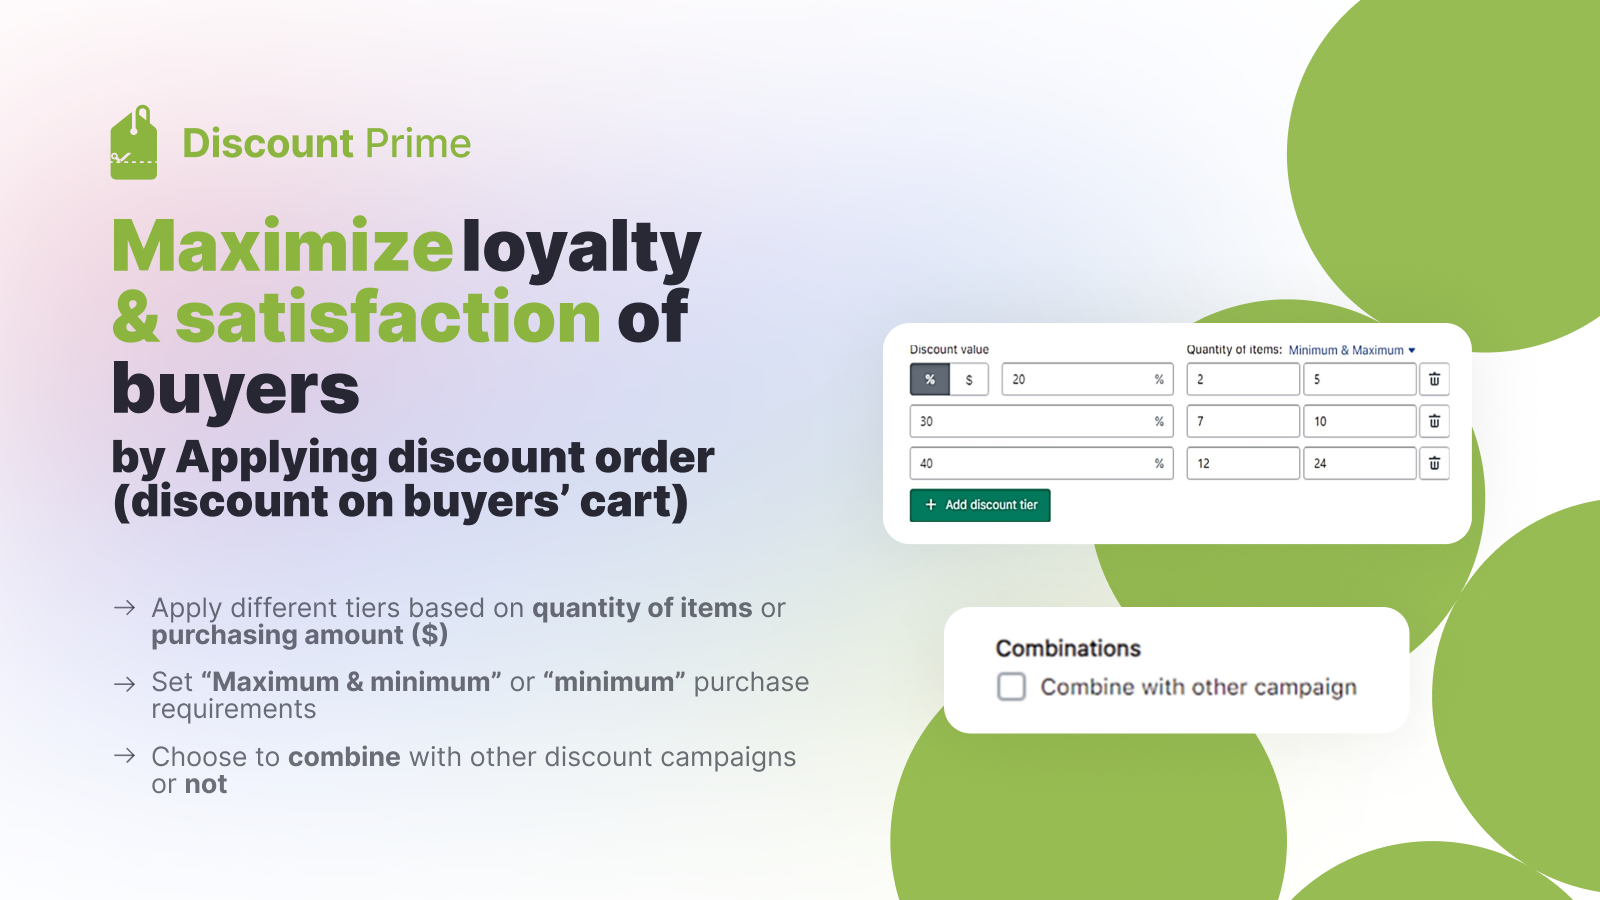 Maximizing loyalty & satisfaction of buyers with order discount